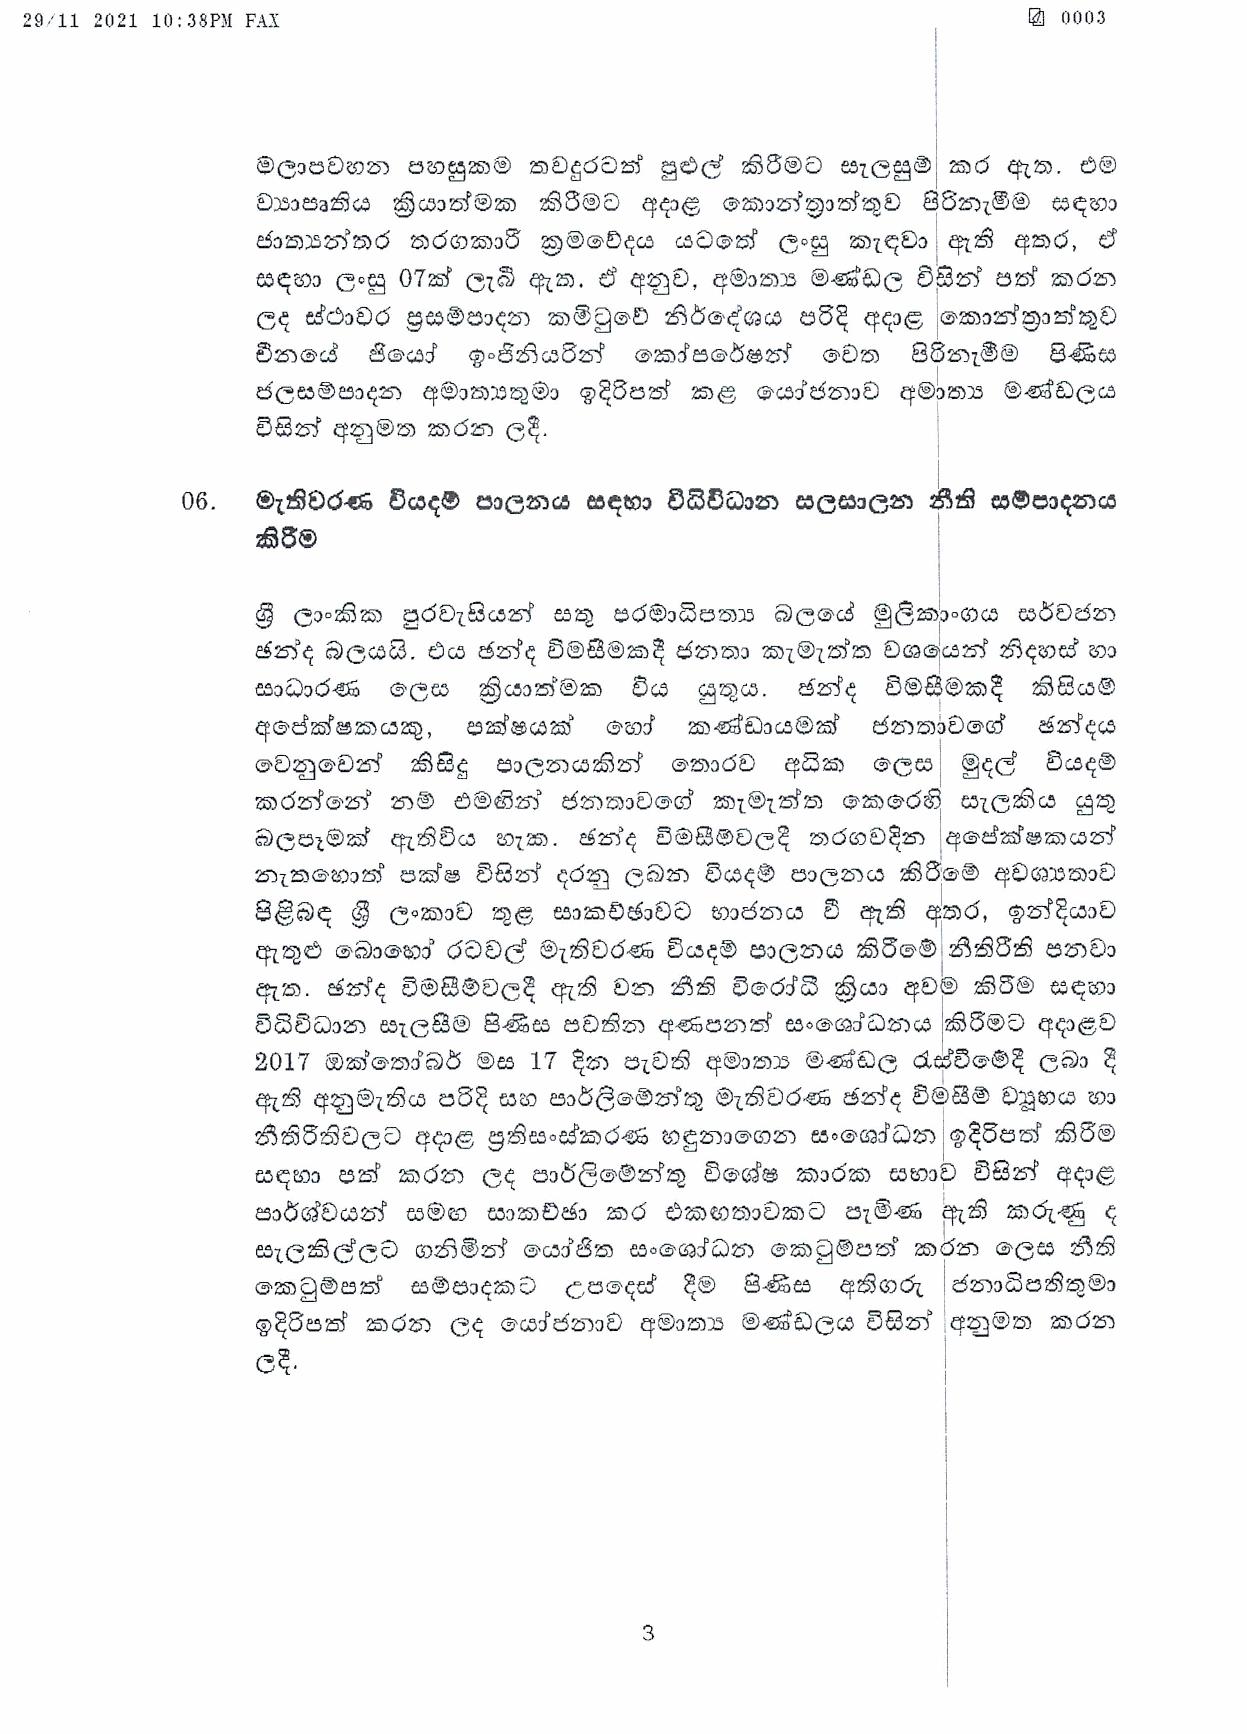 Cabinet Decisions on 29.11.2021 Sinhala page 003